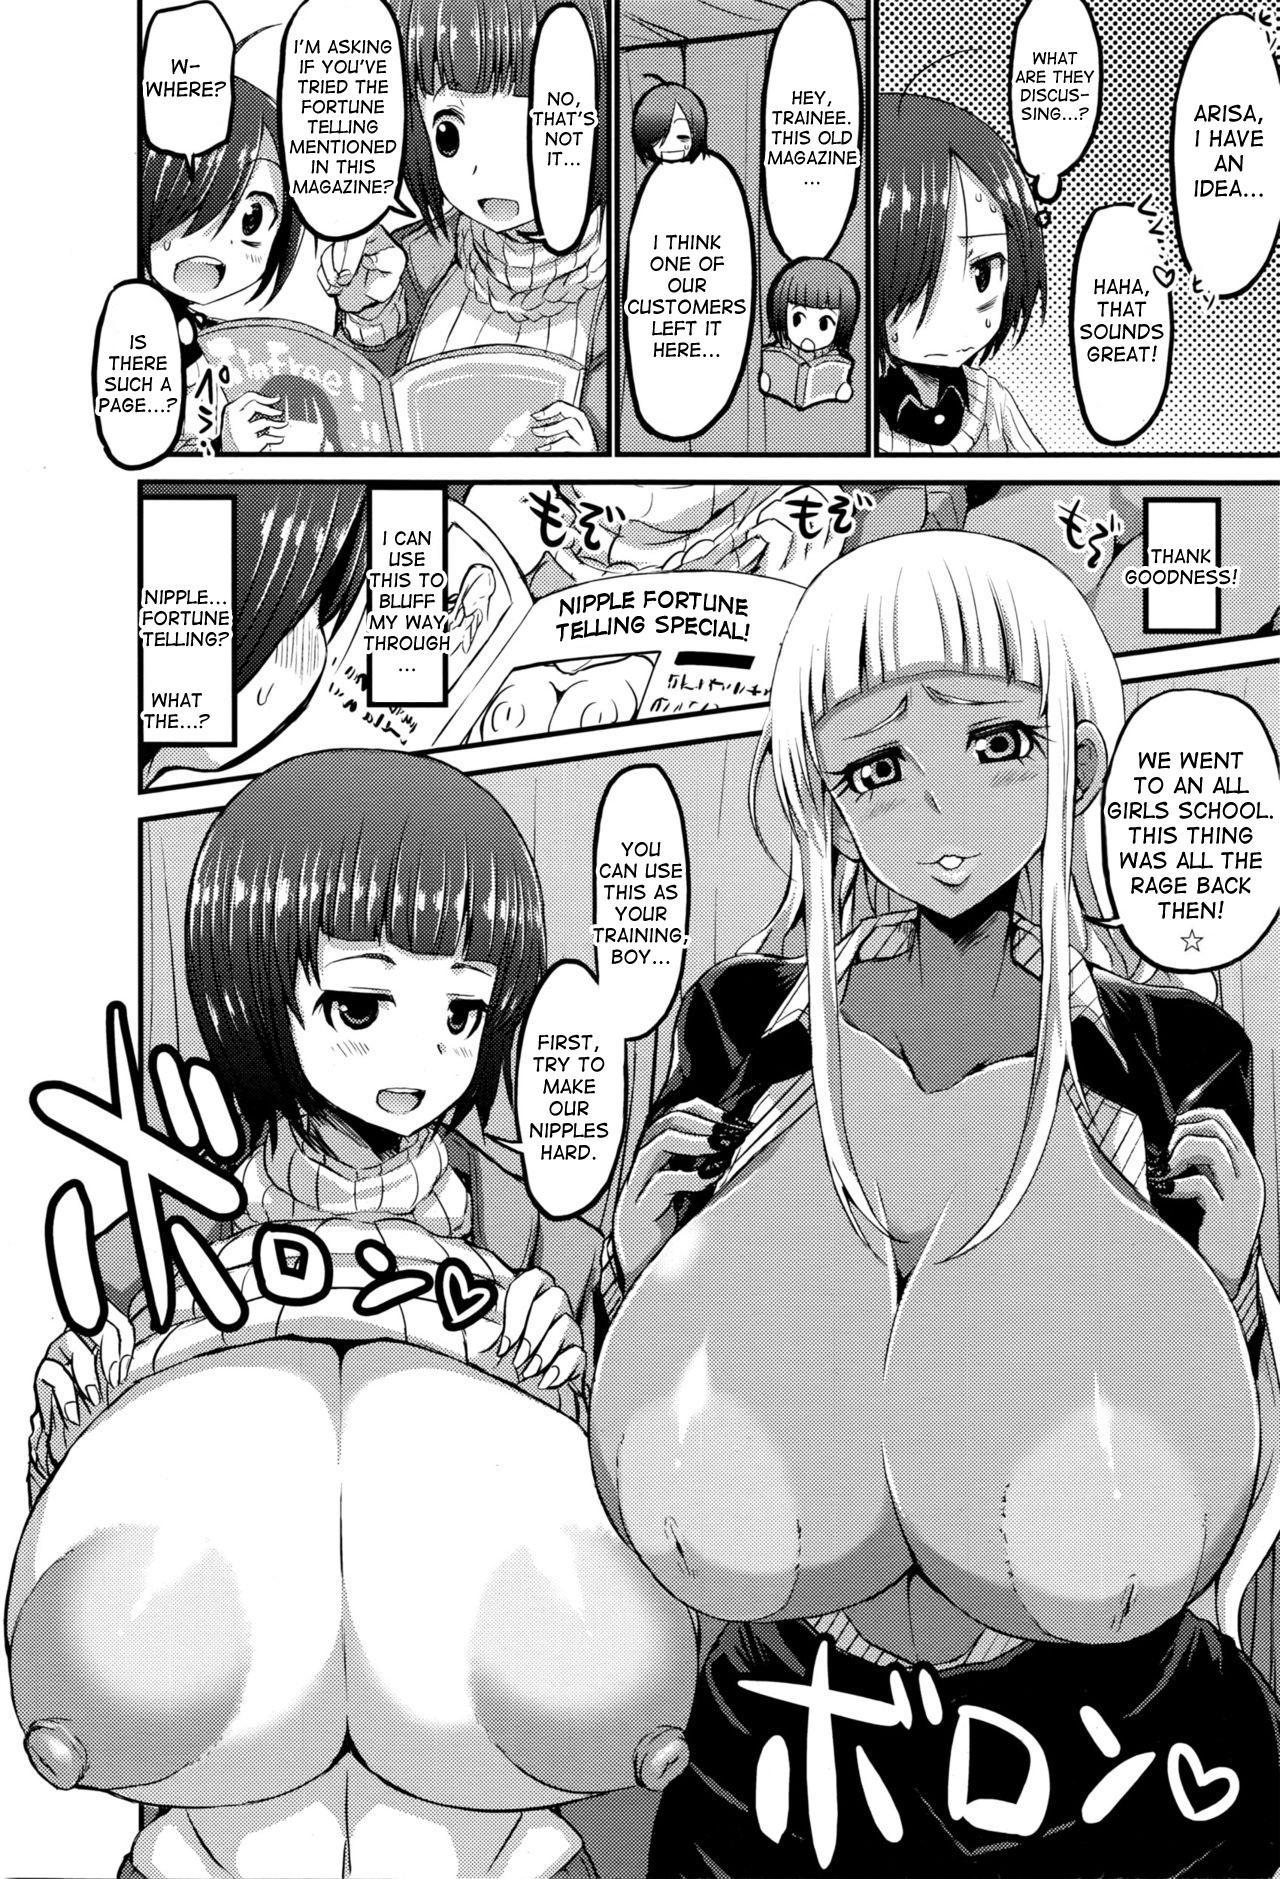 Lovers Chikubi Uranai kara no Arekore | This and That After Nipple Fortune Telling Free Amateur Porn - Page 4